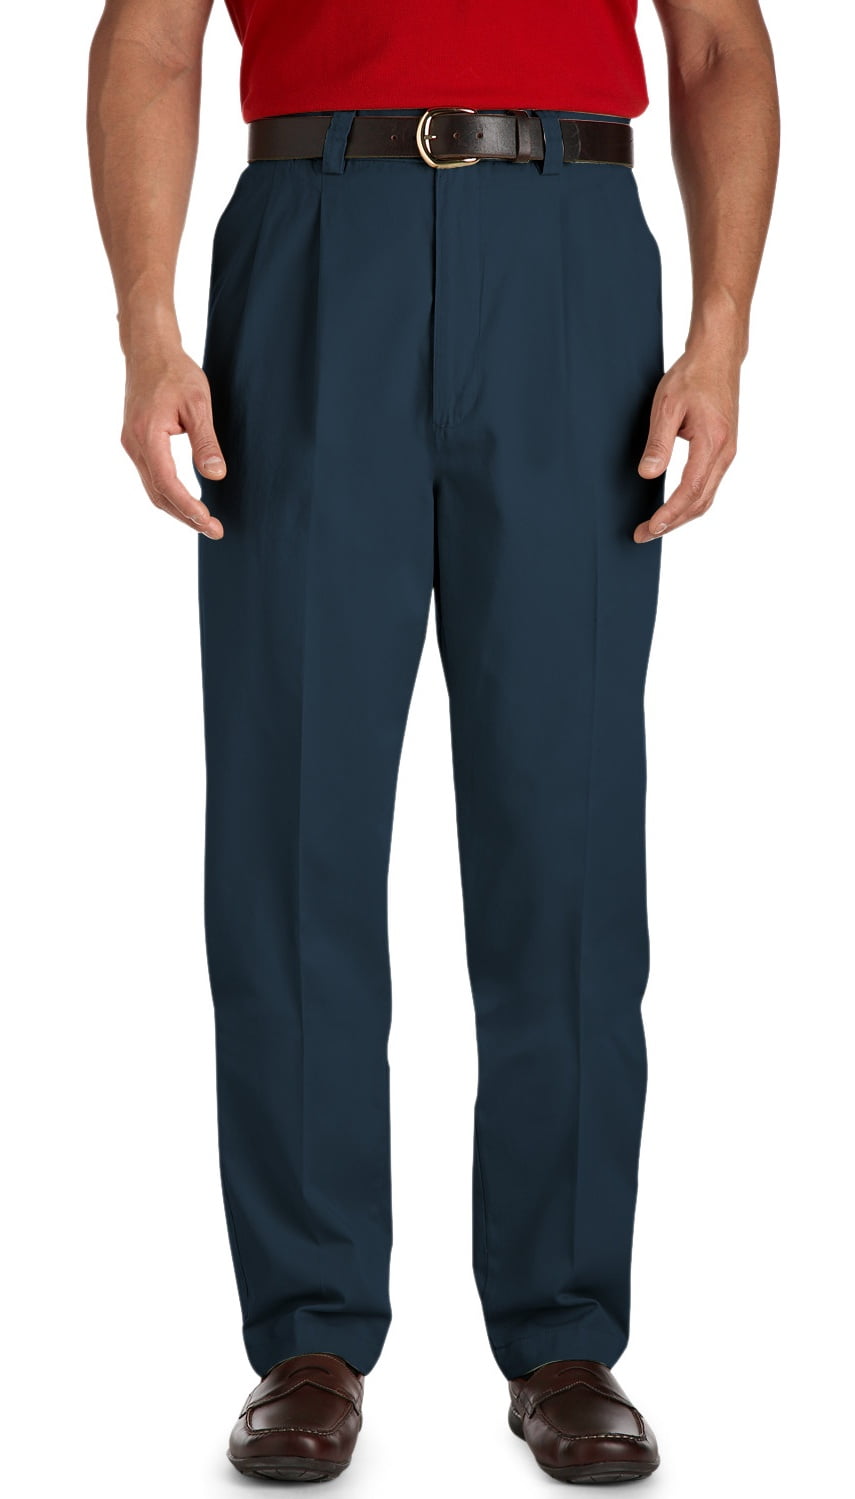 Harbor Bay by DXL Big and Tall Waist-Relaxer Pants 